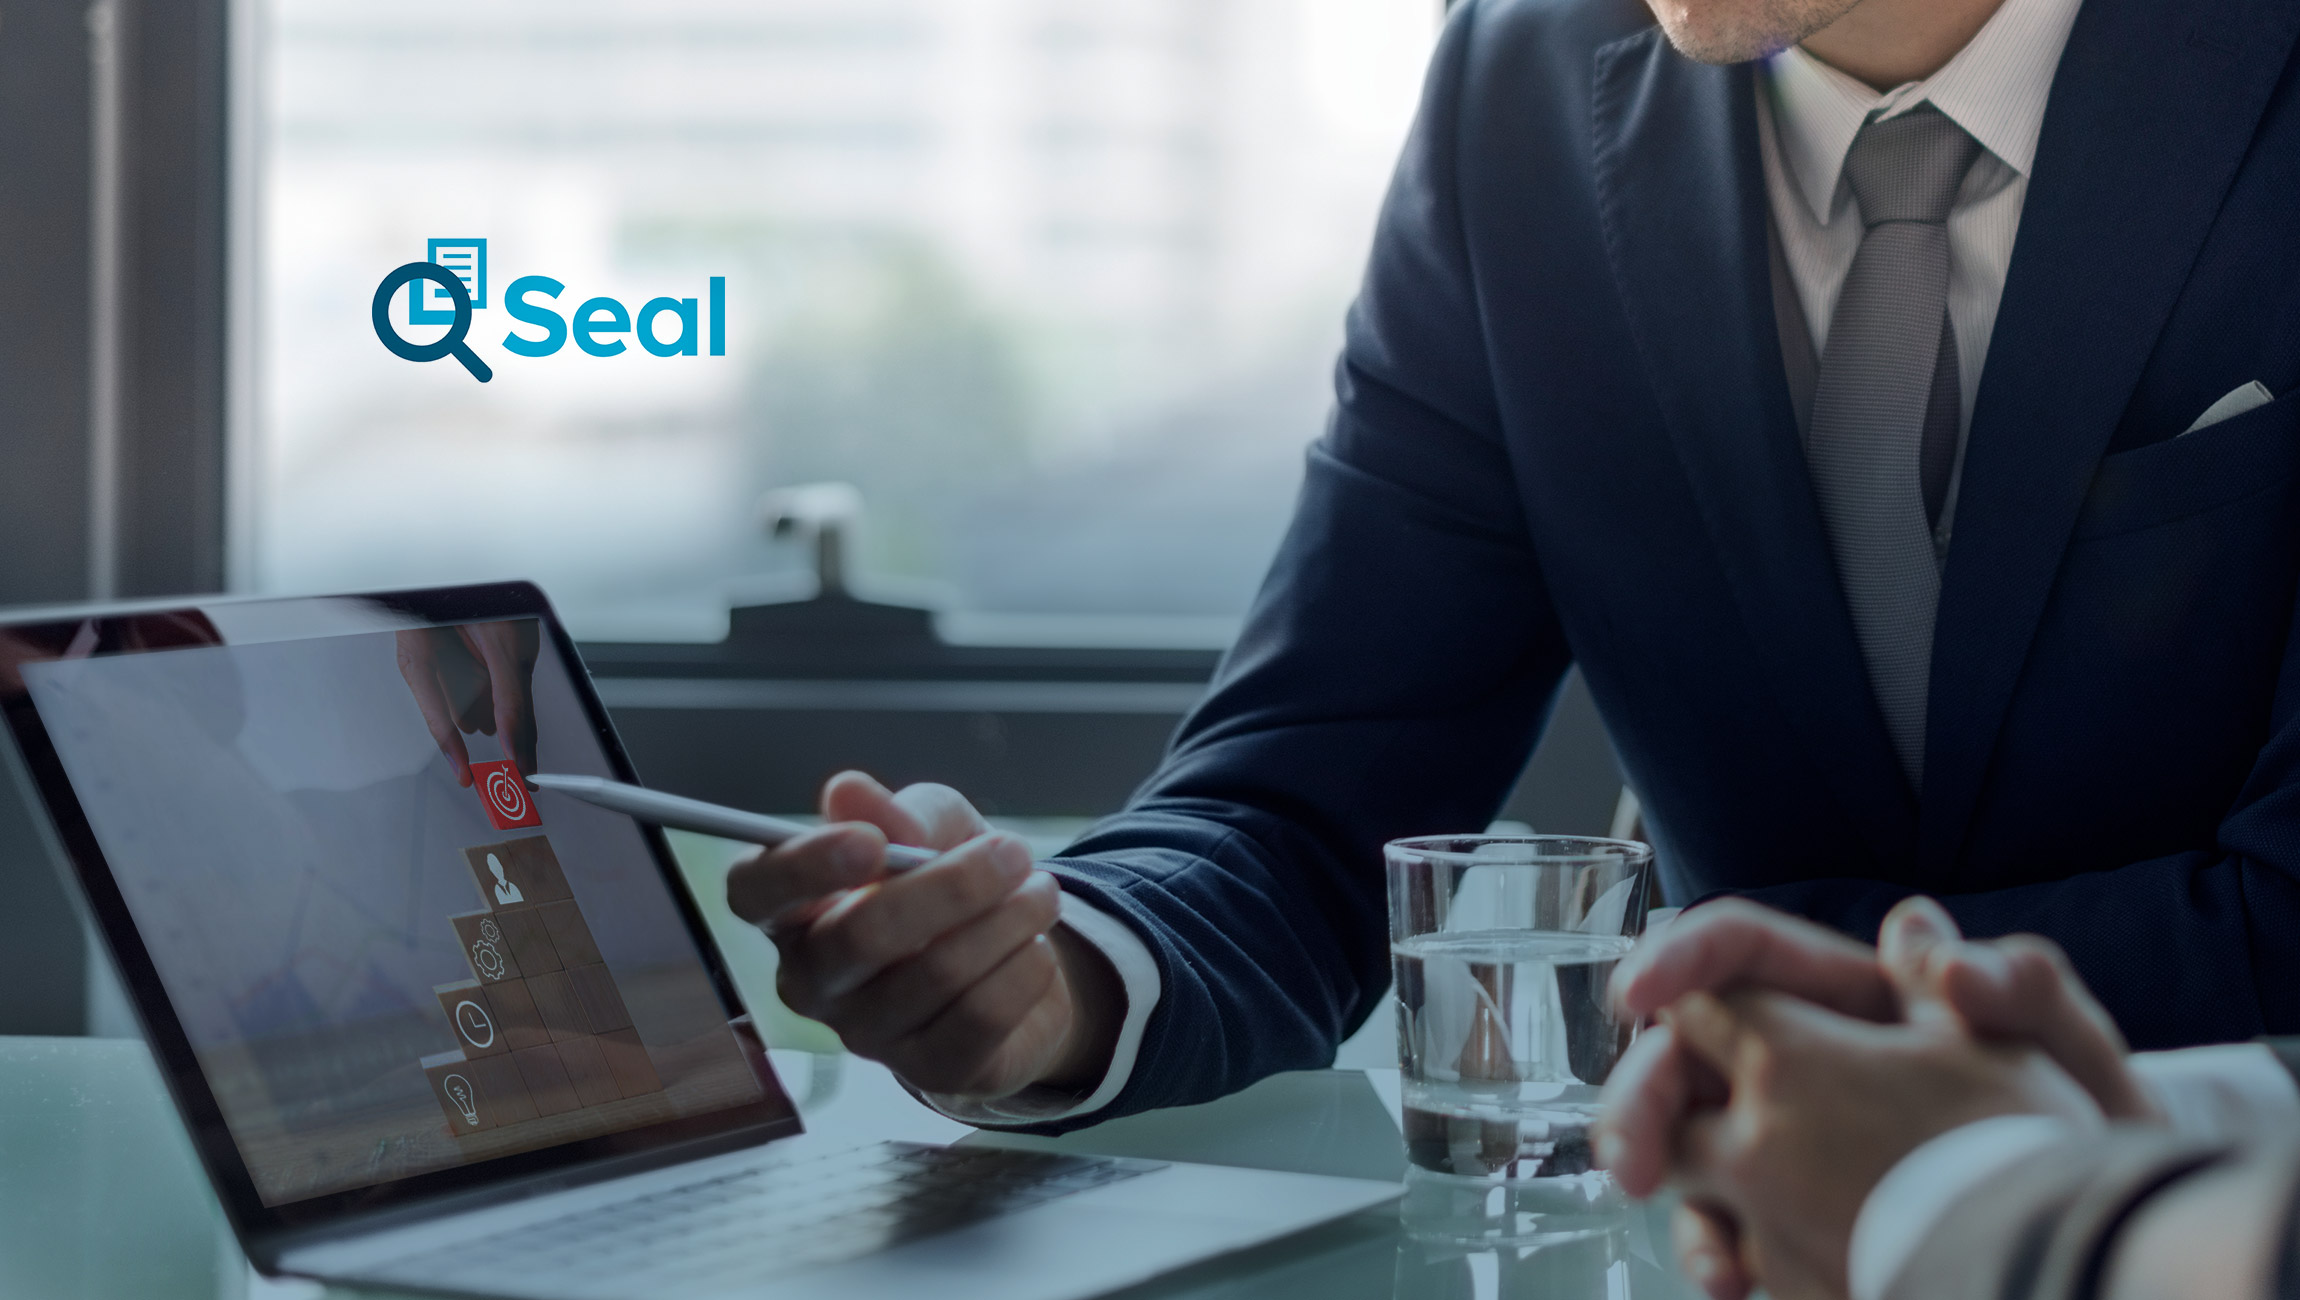 Seal Software Announces Version 7 of Award-Winning AI-Based Contract Analytics Platform